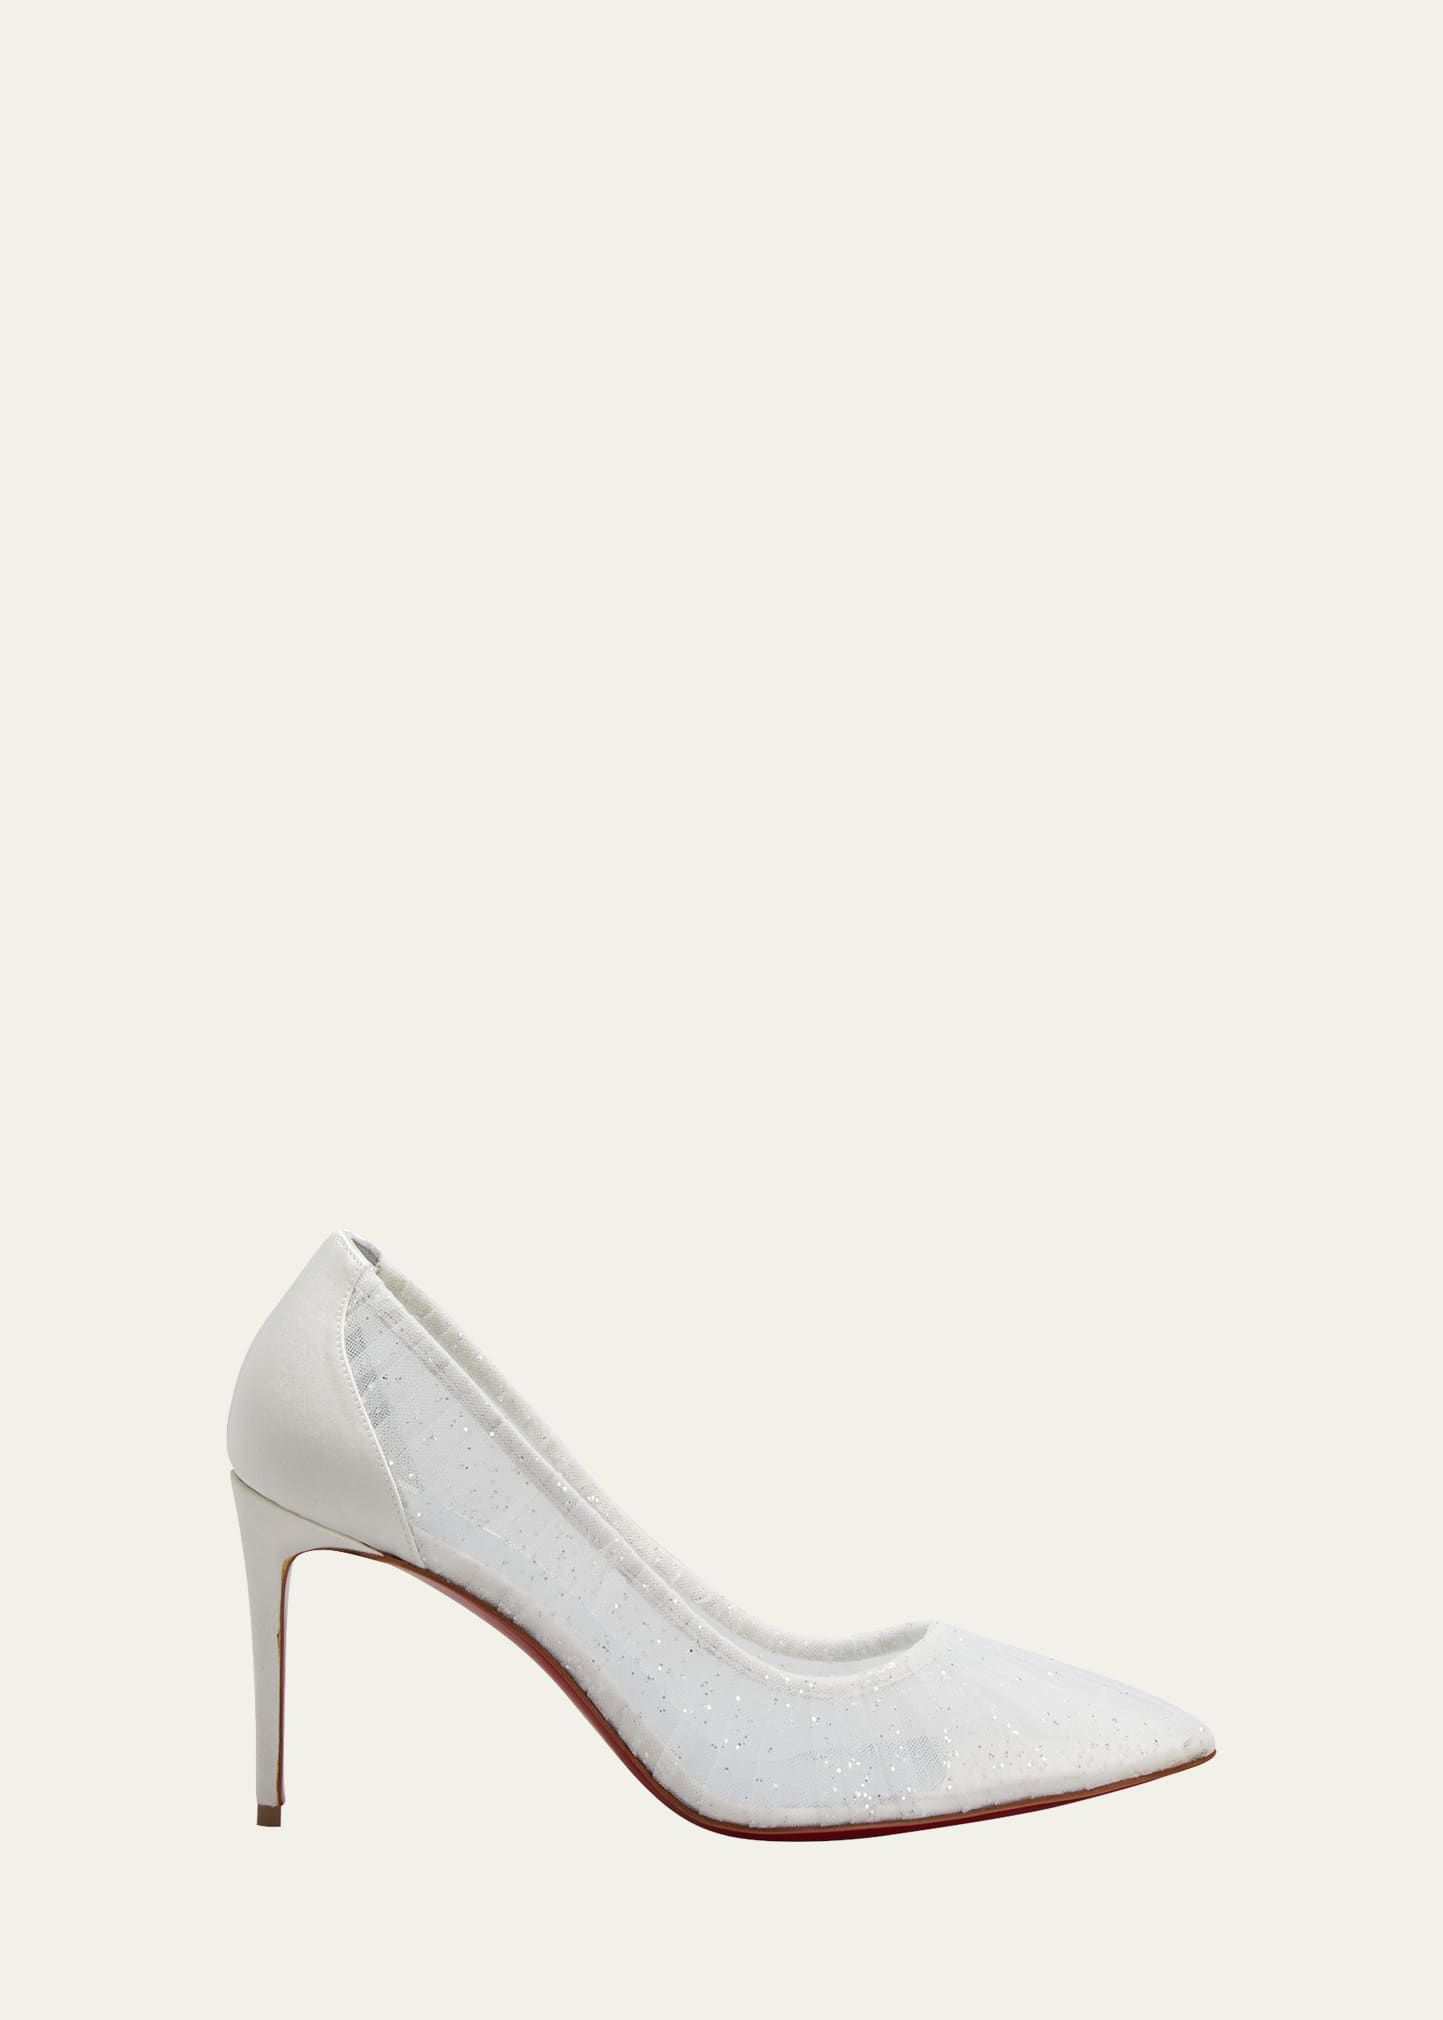 Christian Louboutin Kate Draperia 85mm Red Sole Pumps 